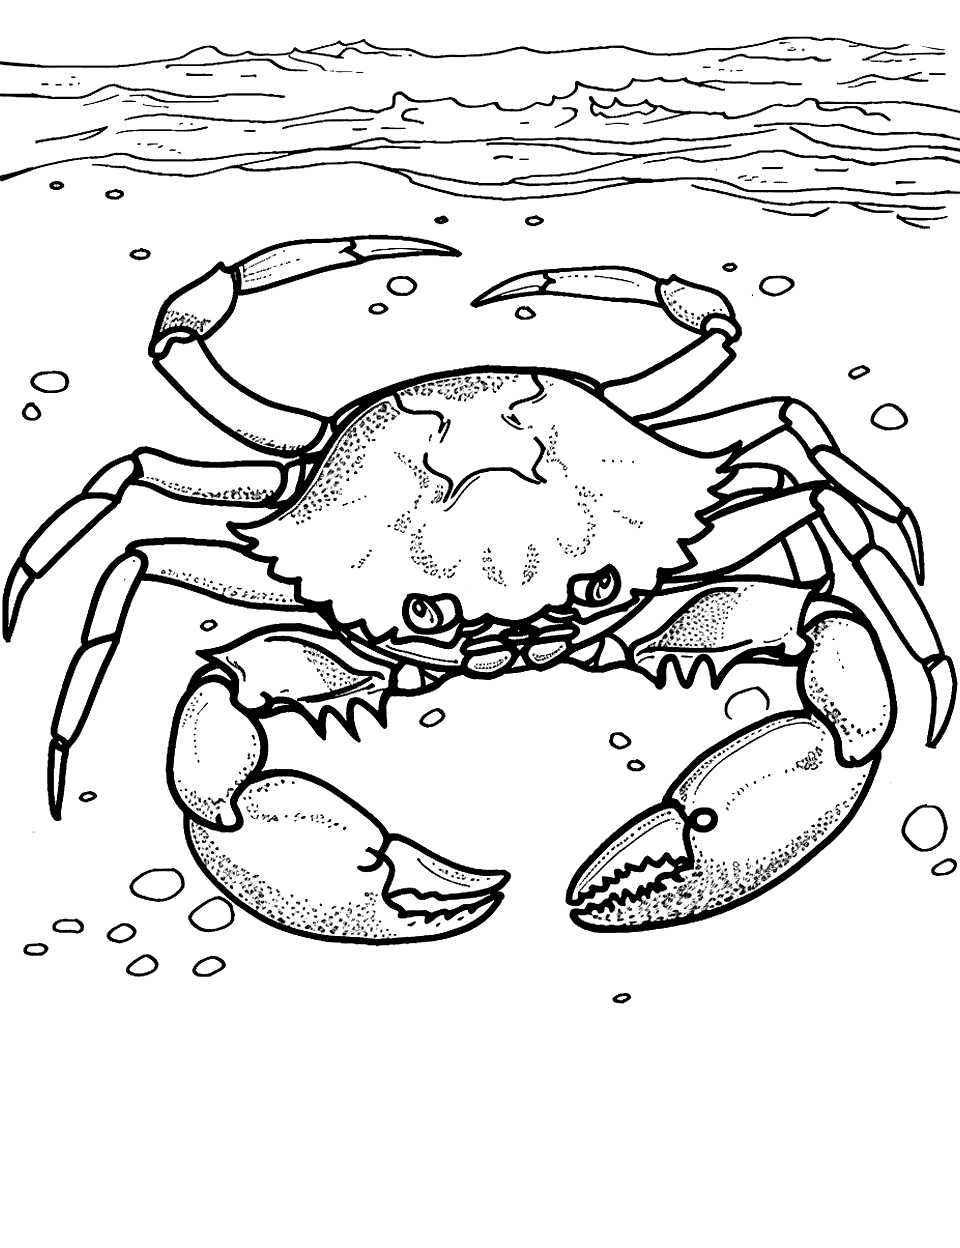 Crab by the Shore Coloring Page - A large crab with prominent claws walking along a sandy shore near the ocean.